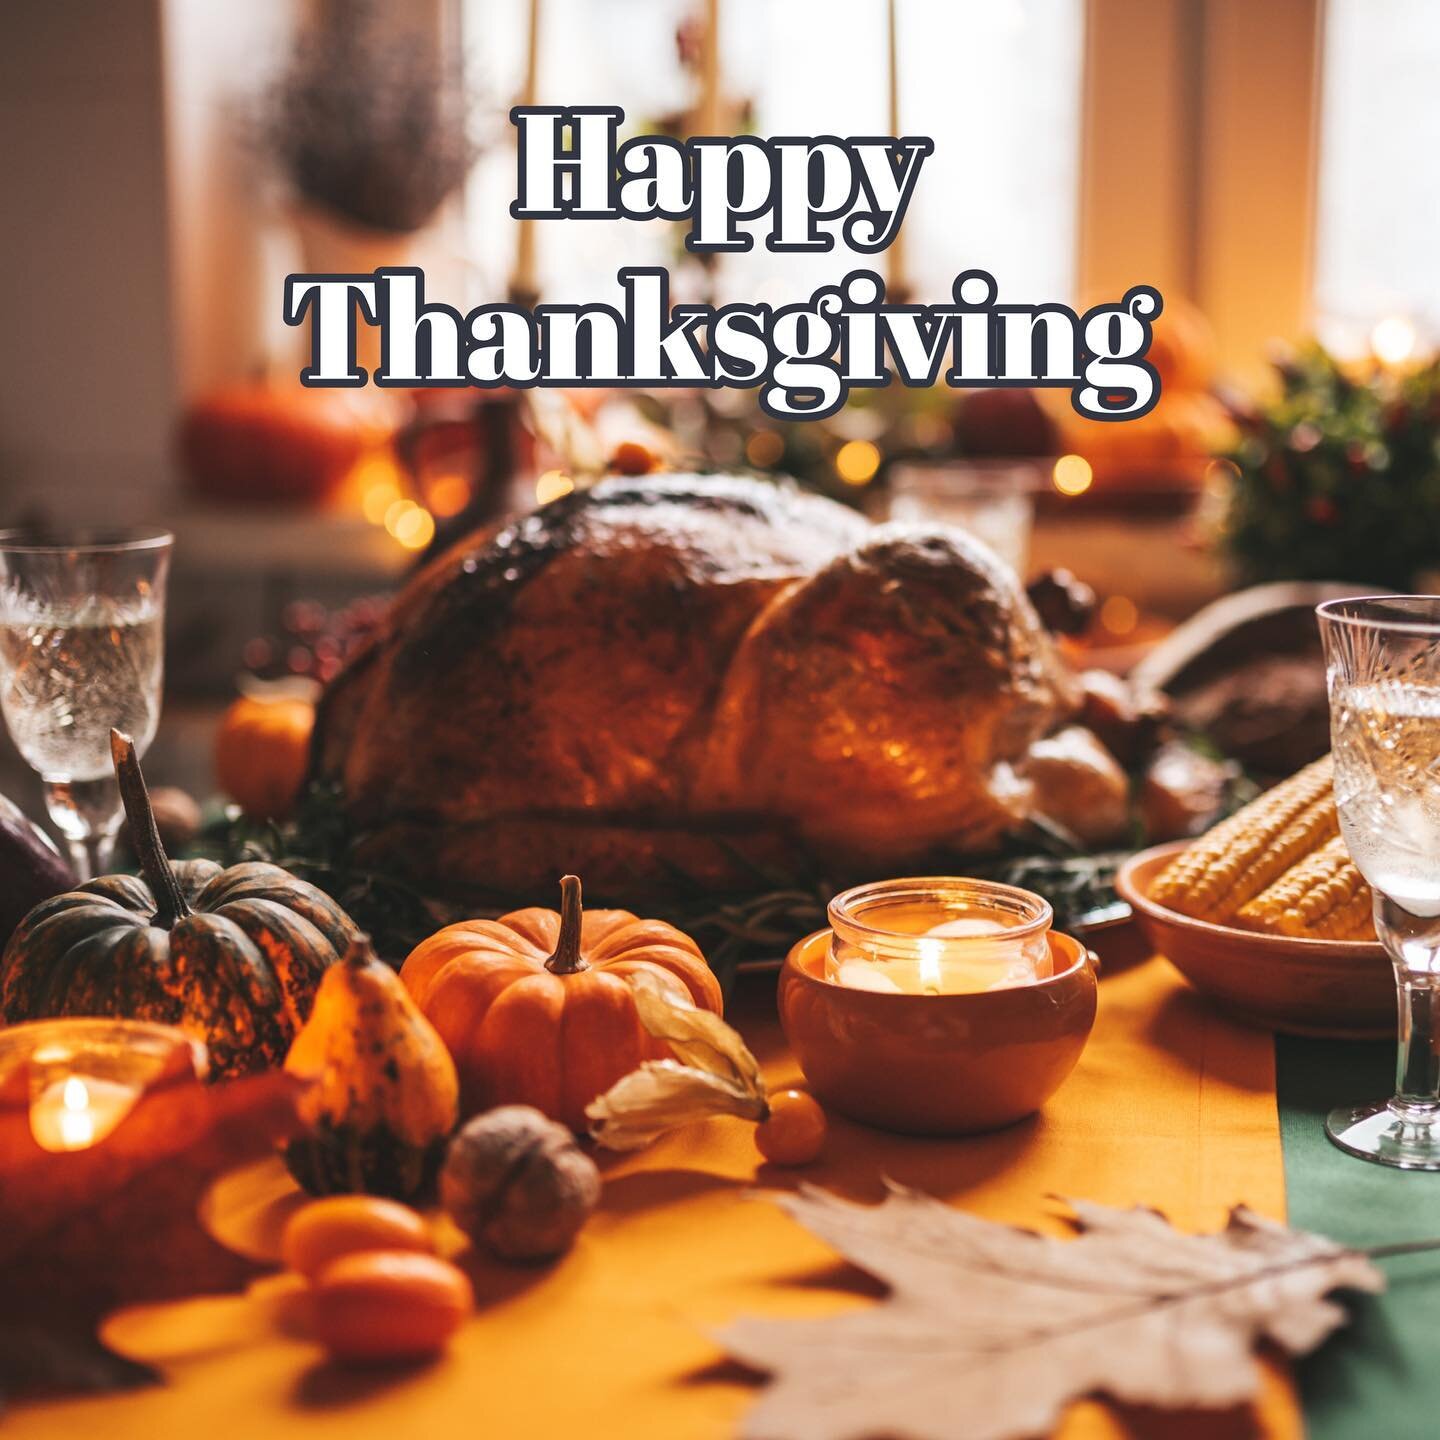 A very Happy Thanksgiving to everyone. May we all be truly grateful for all the wonderful blessings in our lives.